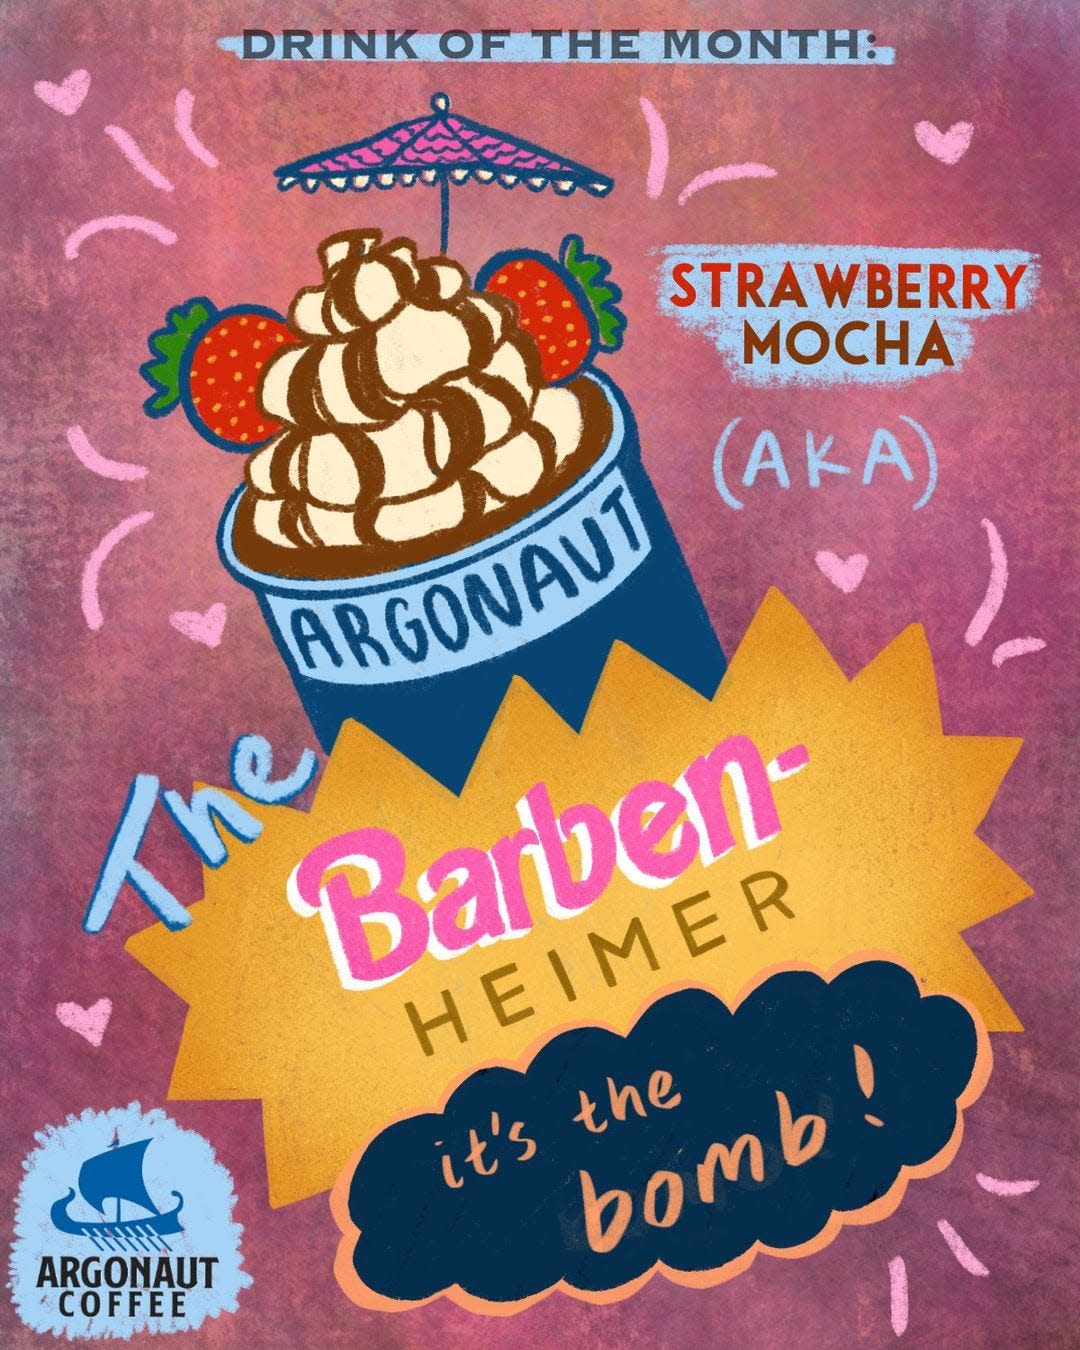 The August drink of the month for Argonaut Coffee is the “Barbenheimer,” to coincide with the showing of both the “Barbie” and “Oppenheimer” films.